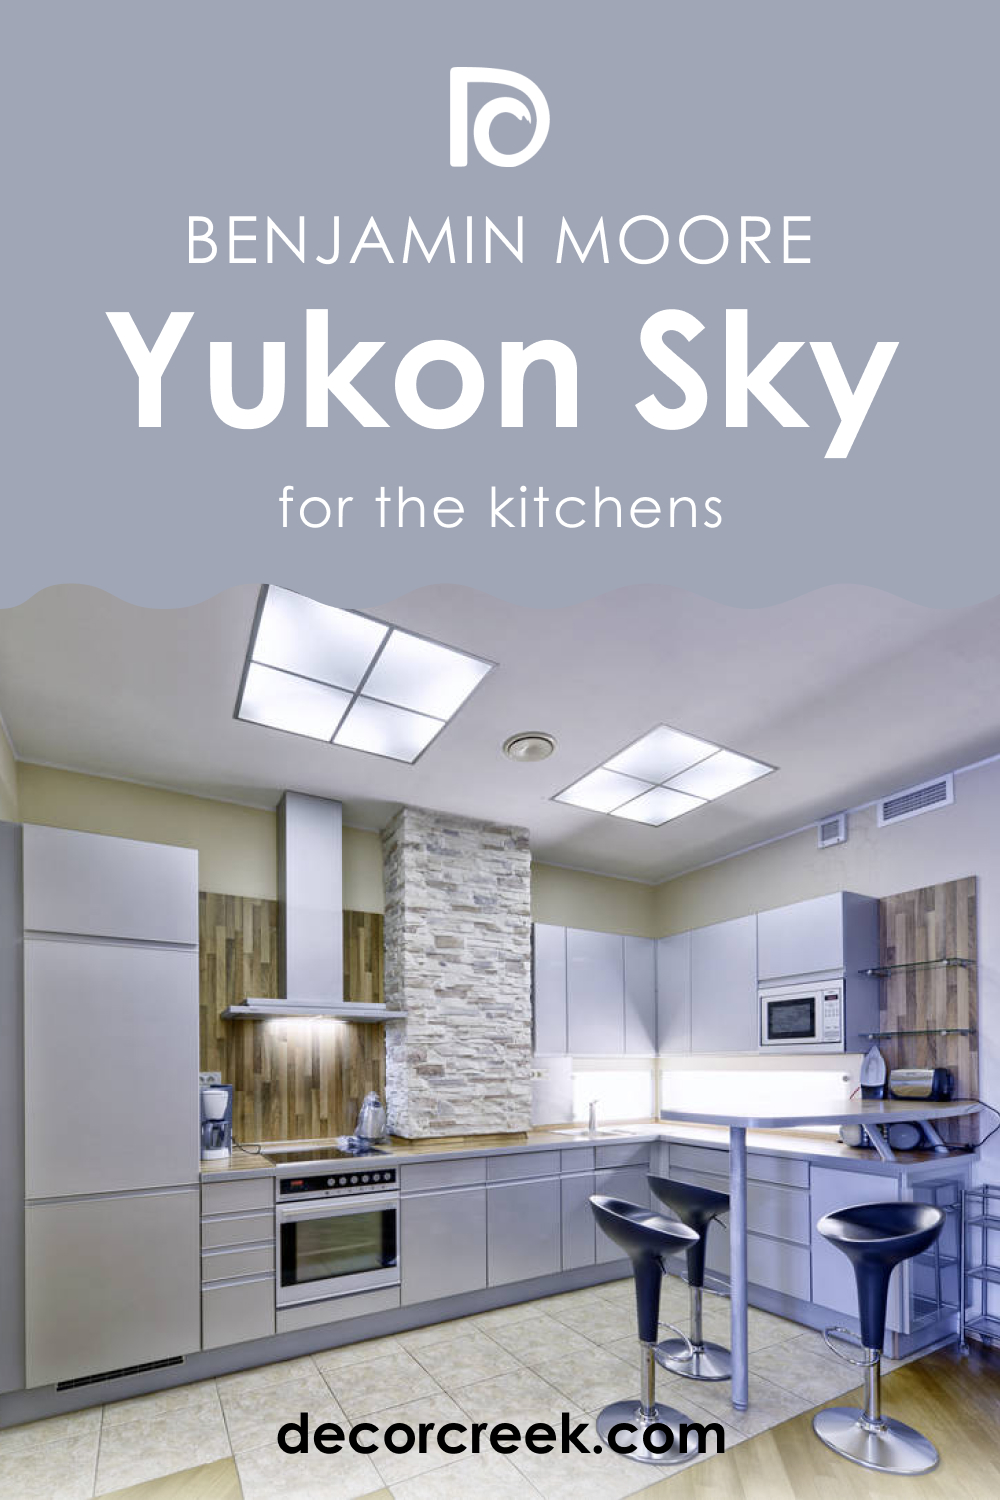 How to Use Yukon Sky 1439 in the Kitchen?